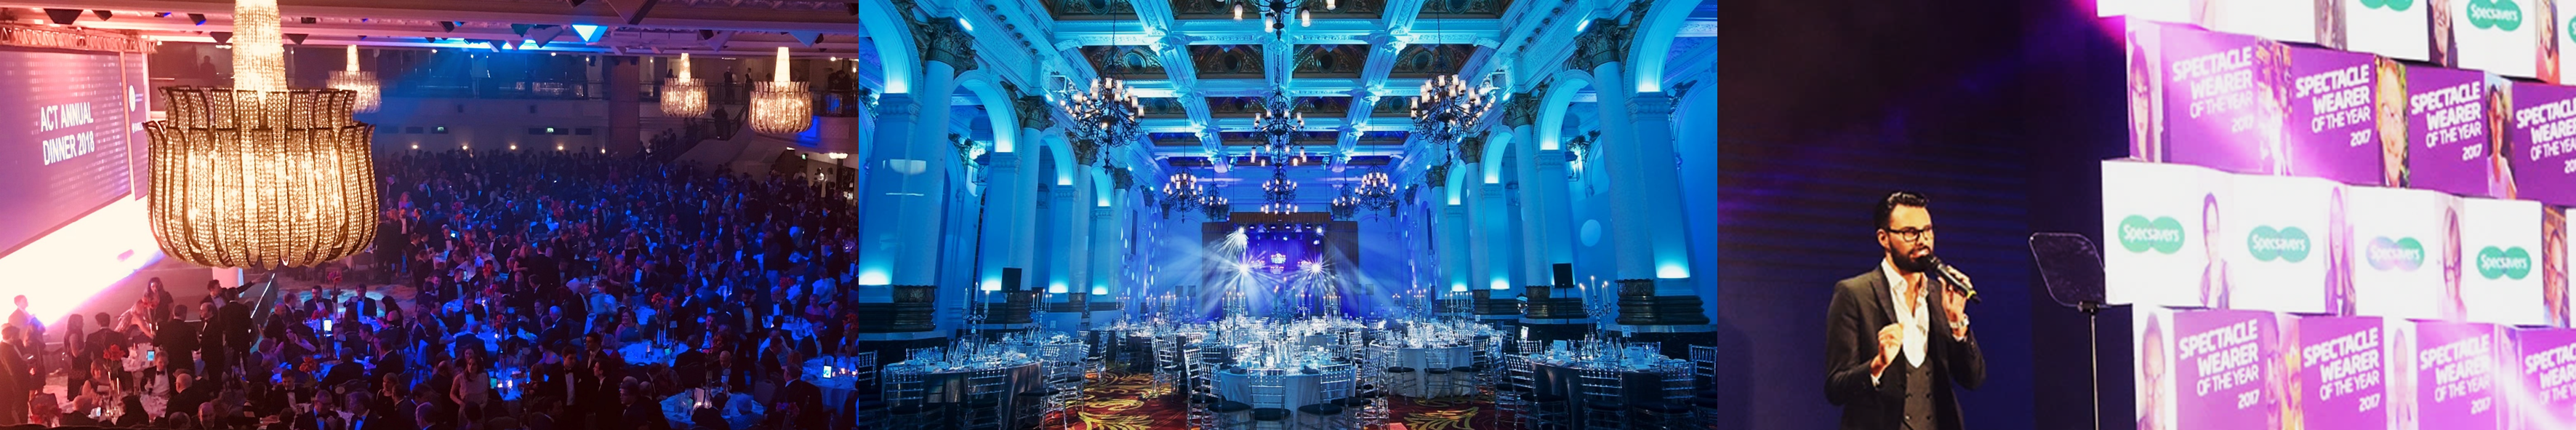 Award shows, dinners & Parties - Trade Services & Event Production Deals